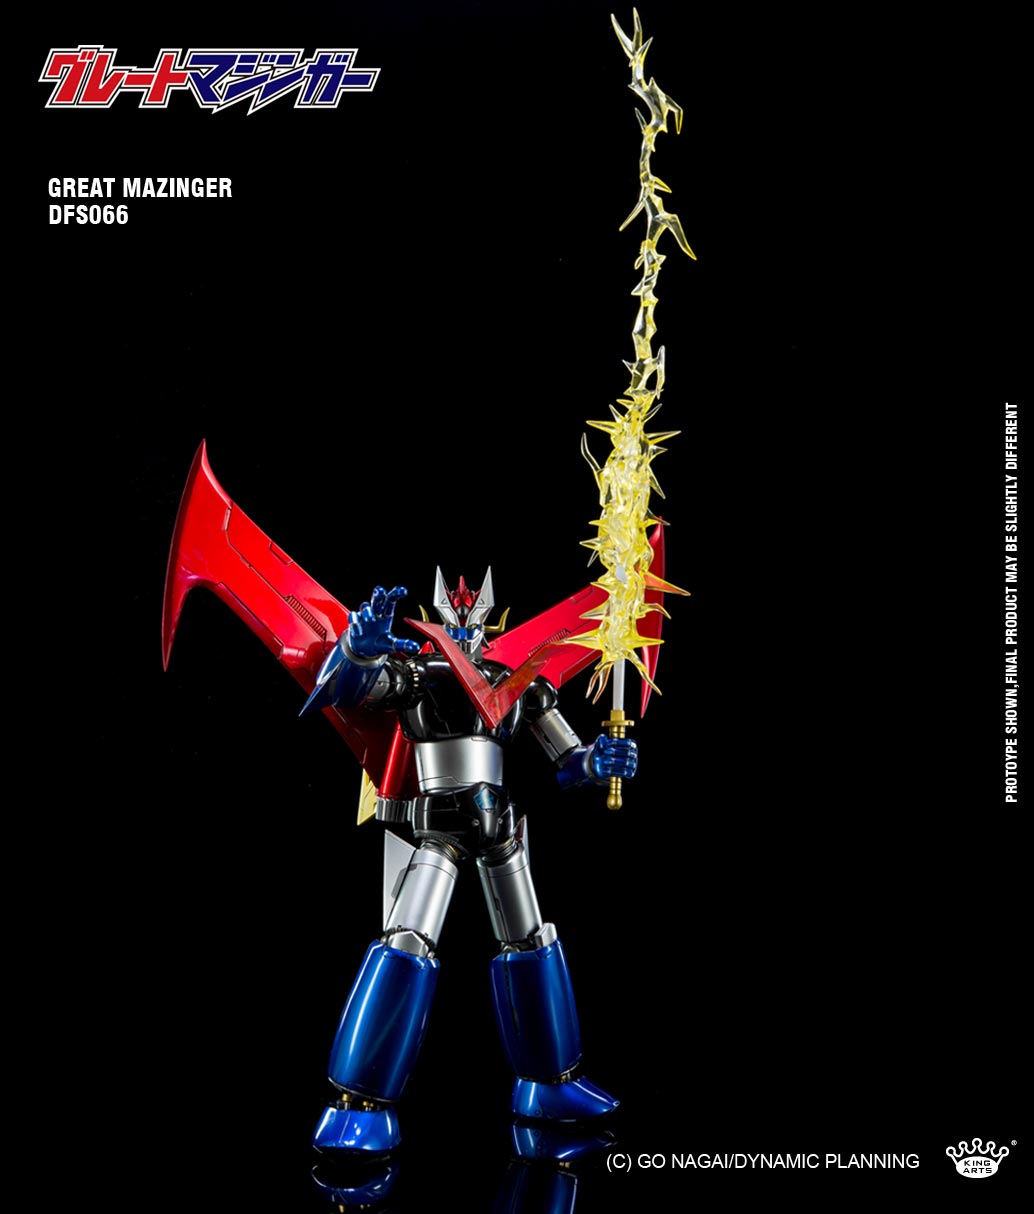 King Arts - DFS066 - Dynamic Planning - Diecast Action Great Mazinger - Marvelous Toys